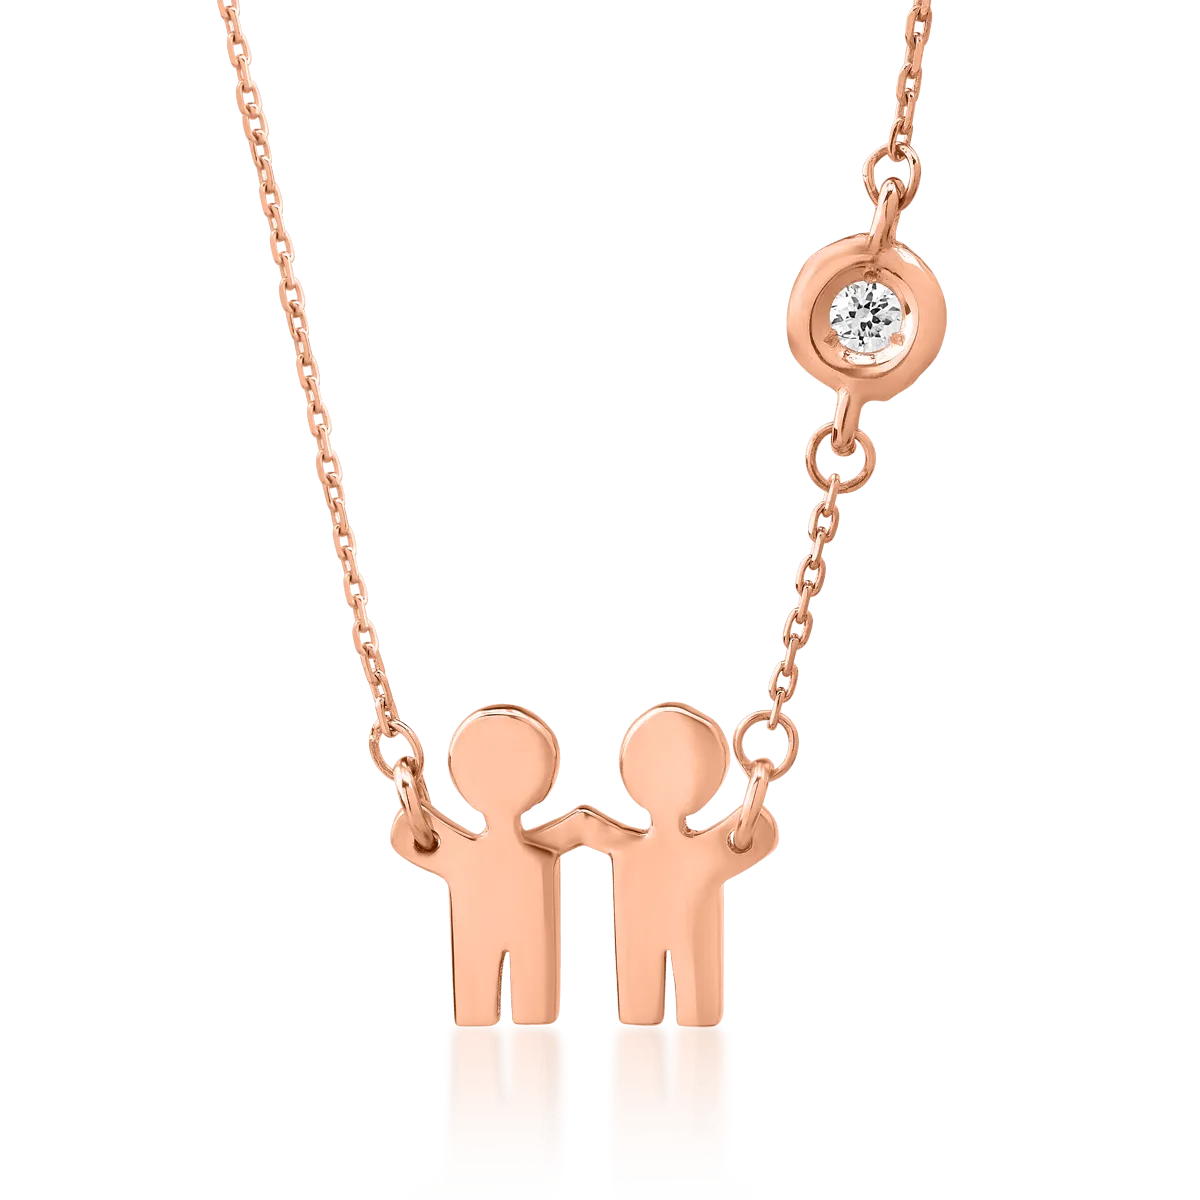 14K rose gold pendant necklace with diamond of 0.02ct